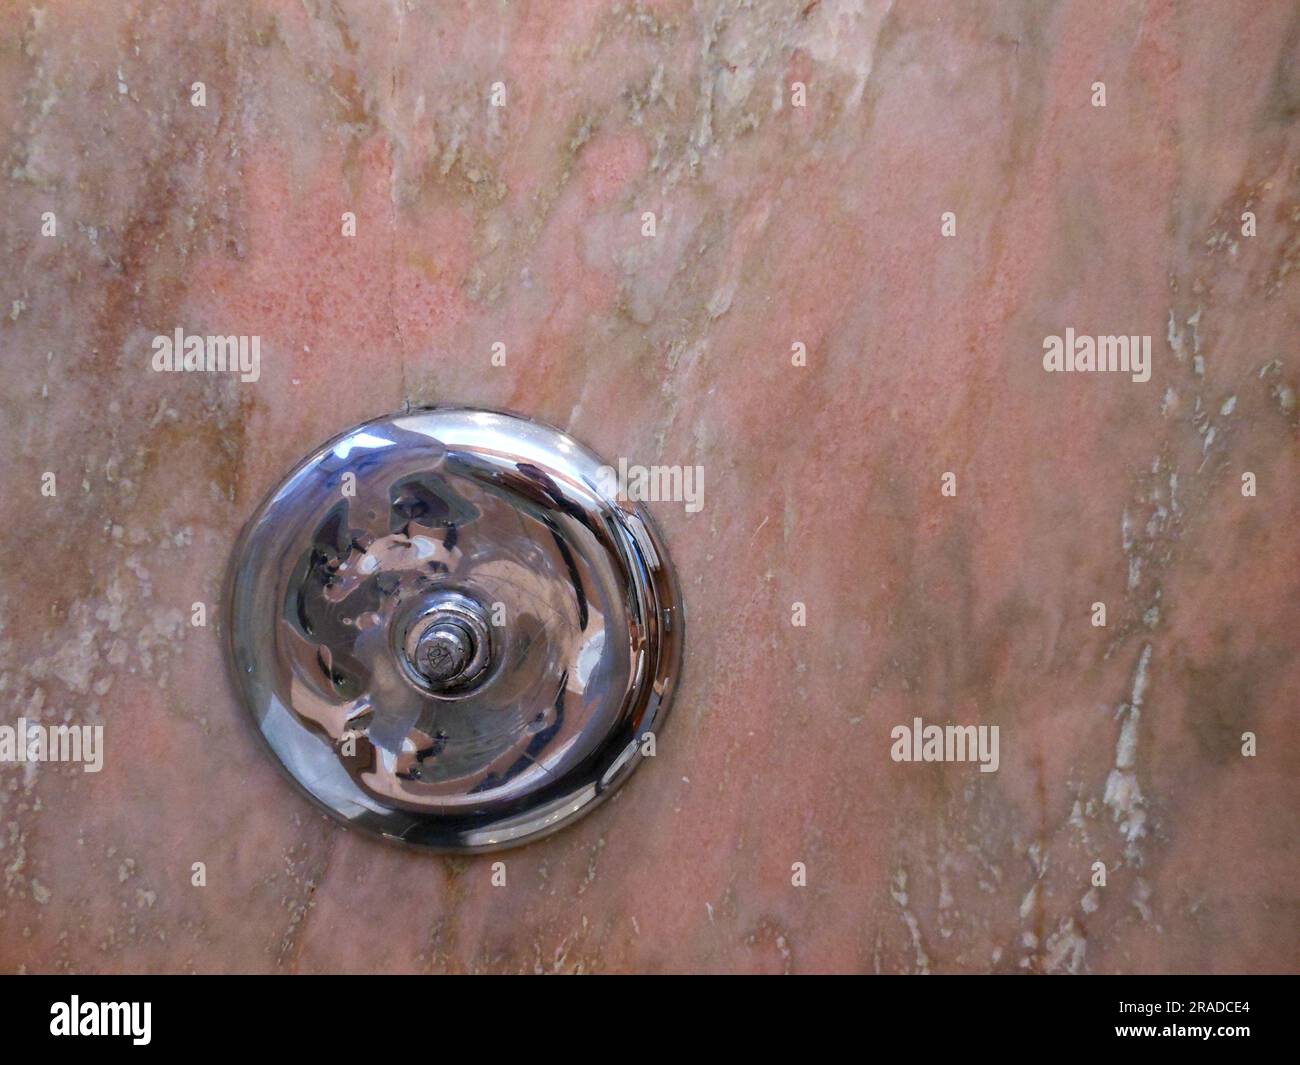 Silver round object on salmon colored marble background Stock Photo